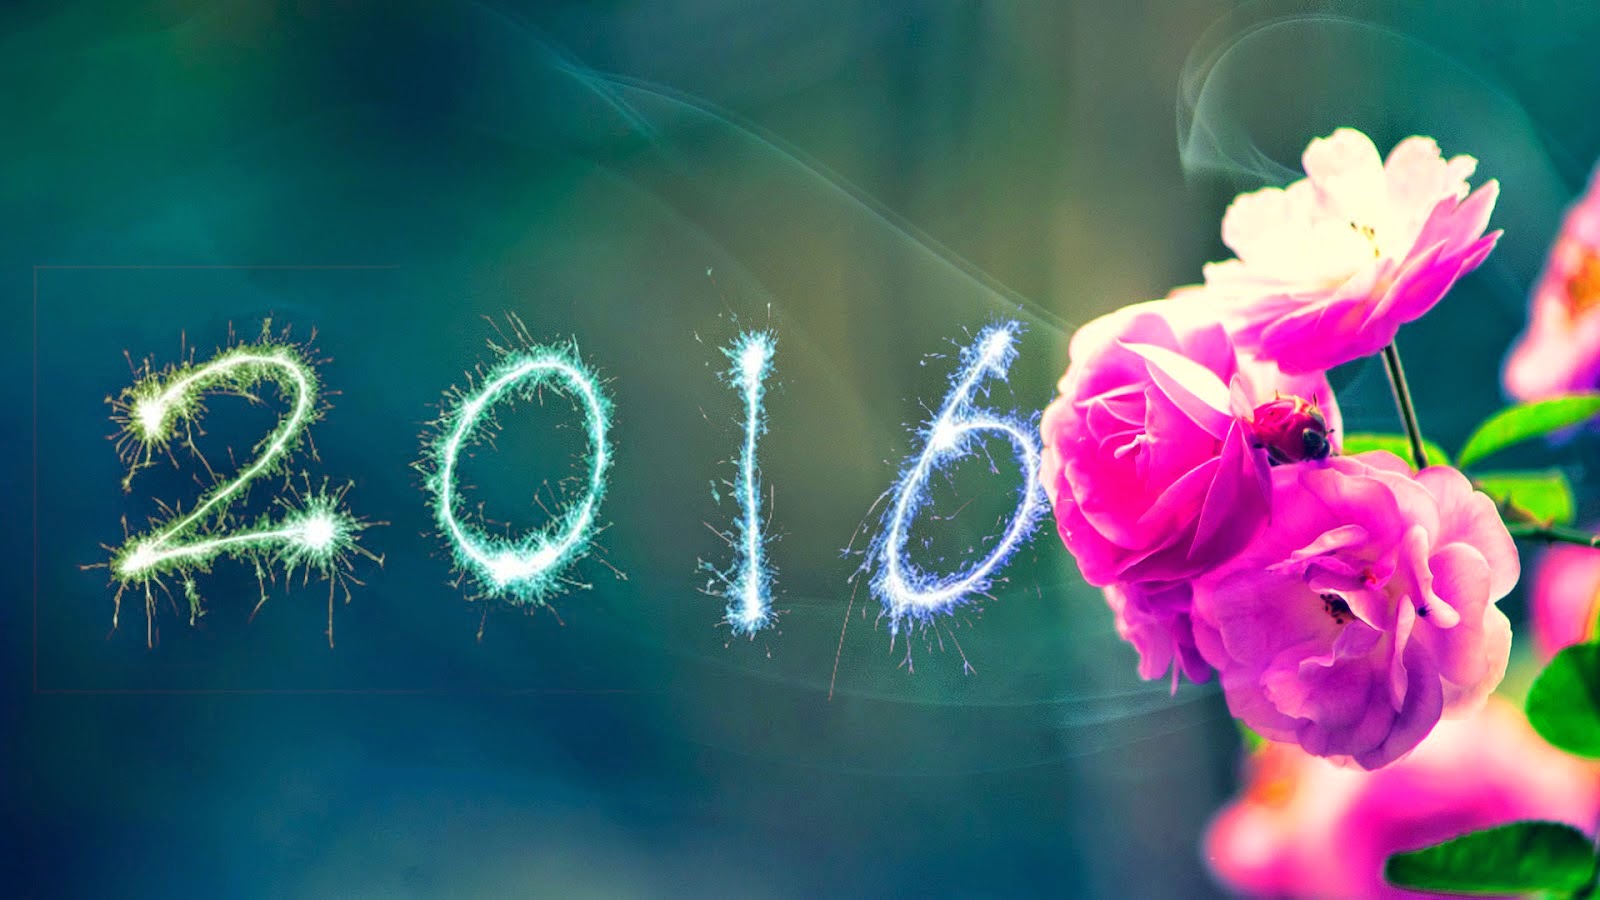 Happy New Year Wishes And Desktop Wallpaper HD